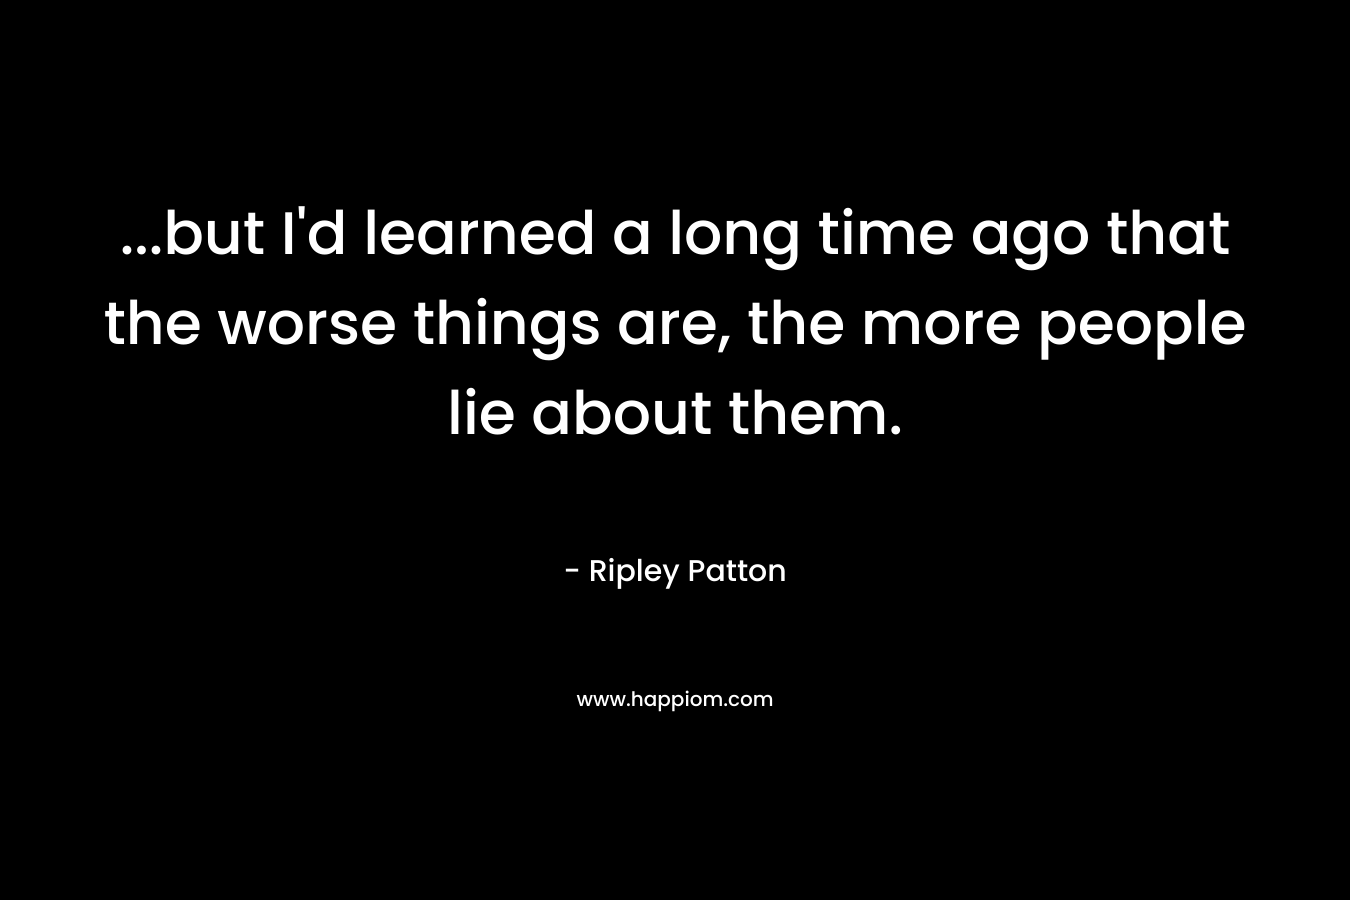 ...but I'd learned a long time ago that the worse things are, the more people lie about them.